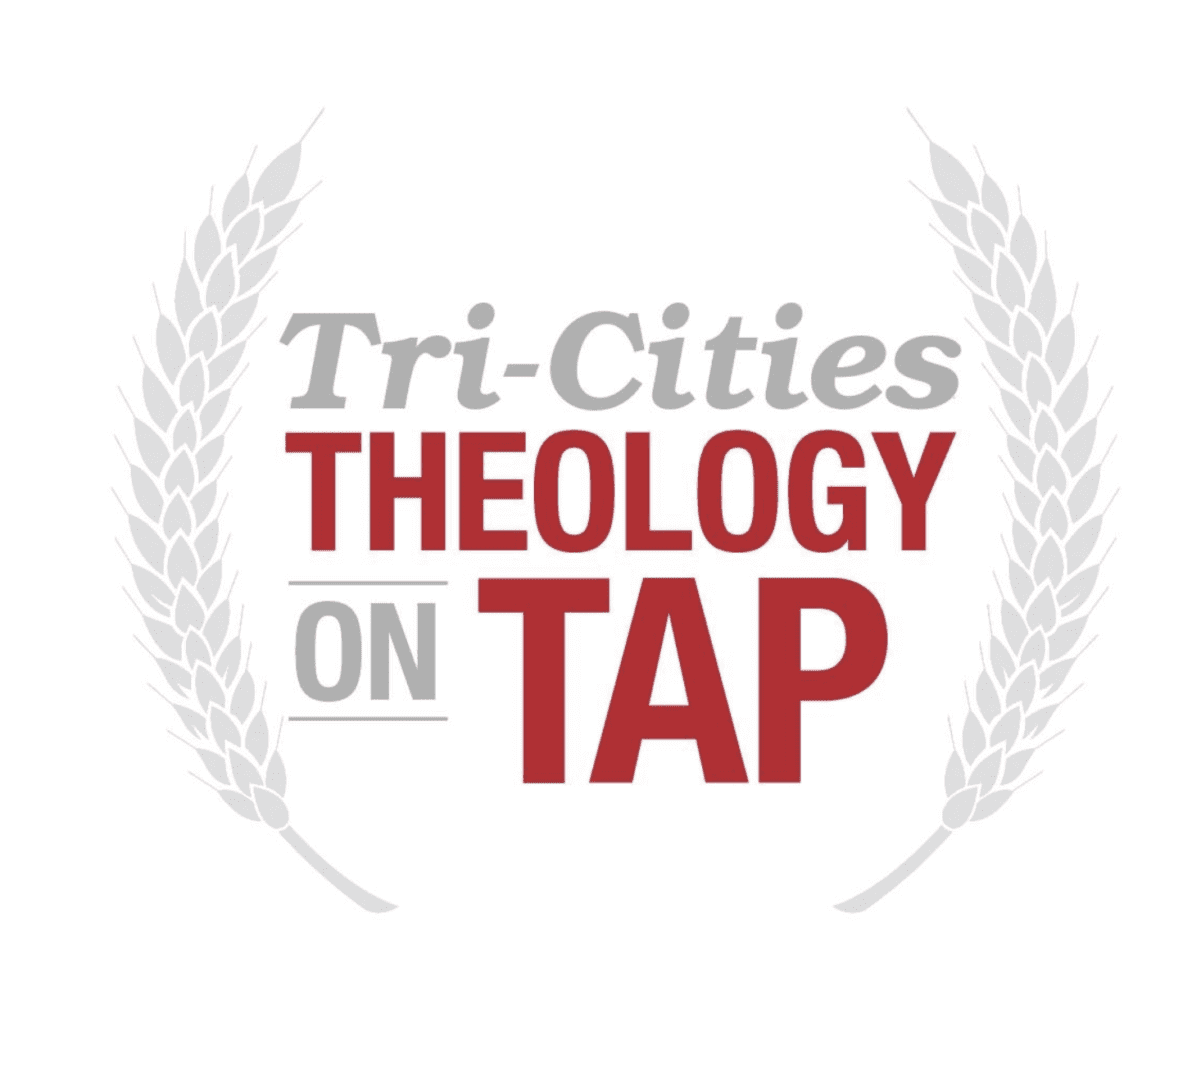 An illustration and logo of Theology on Tap